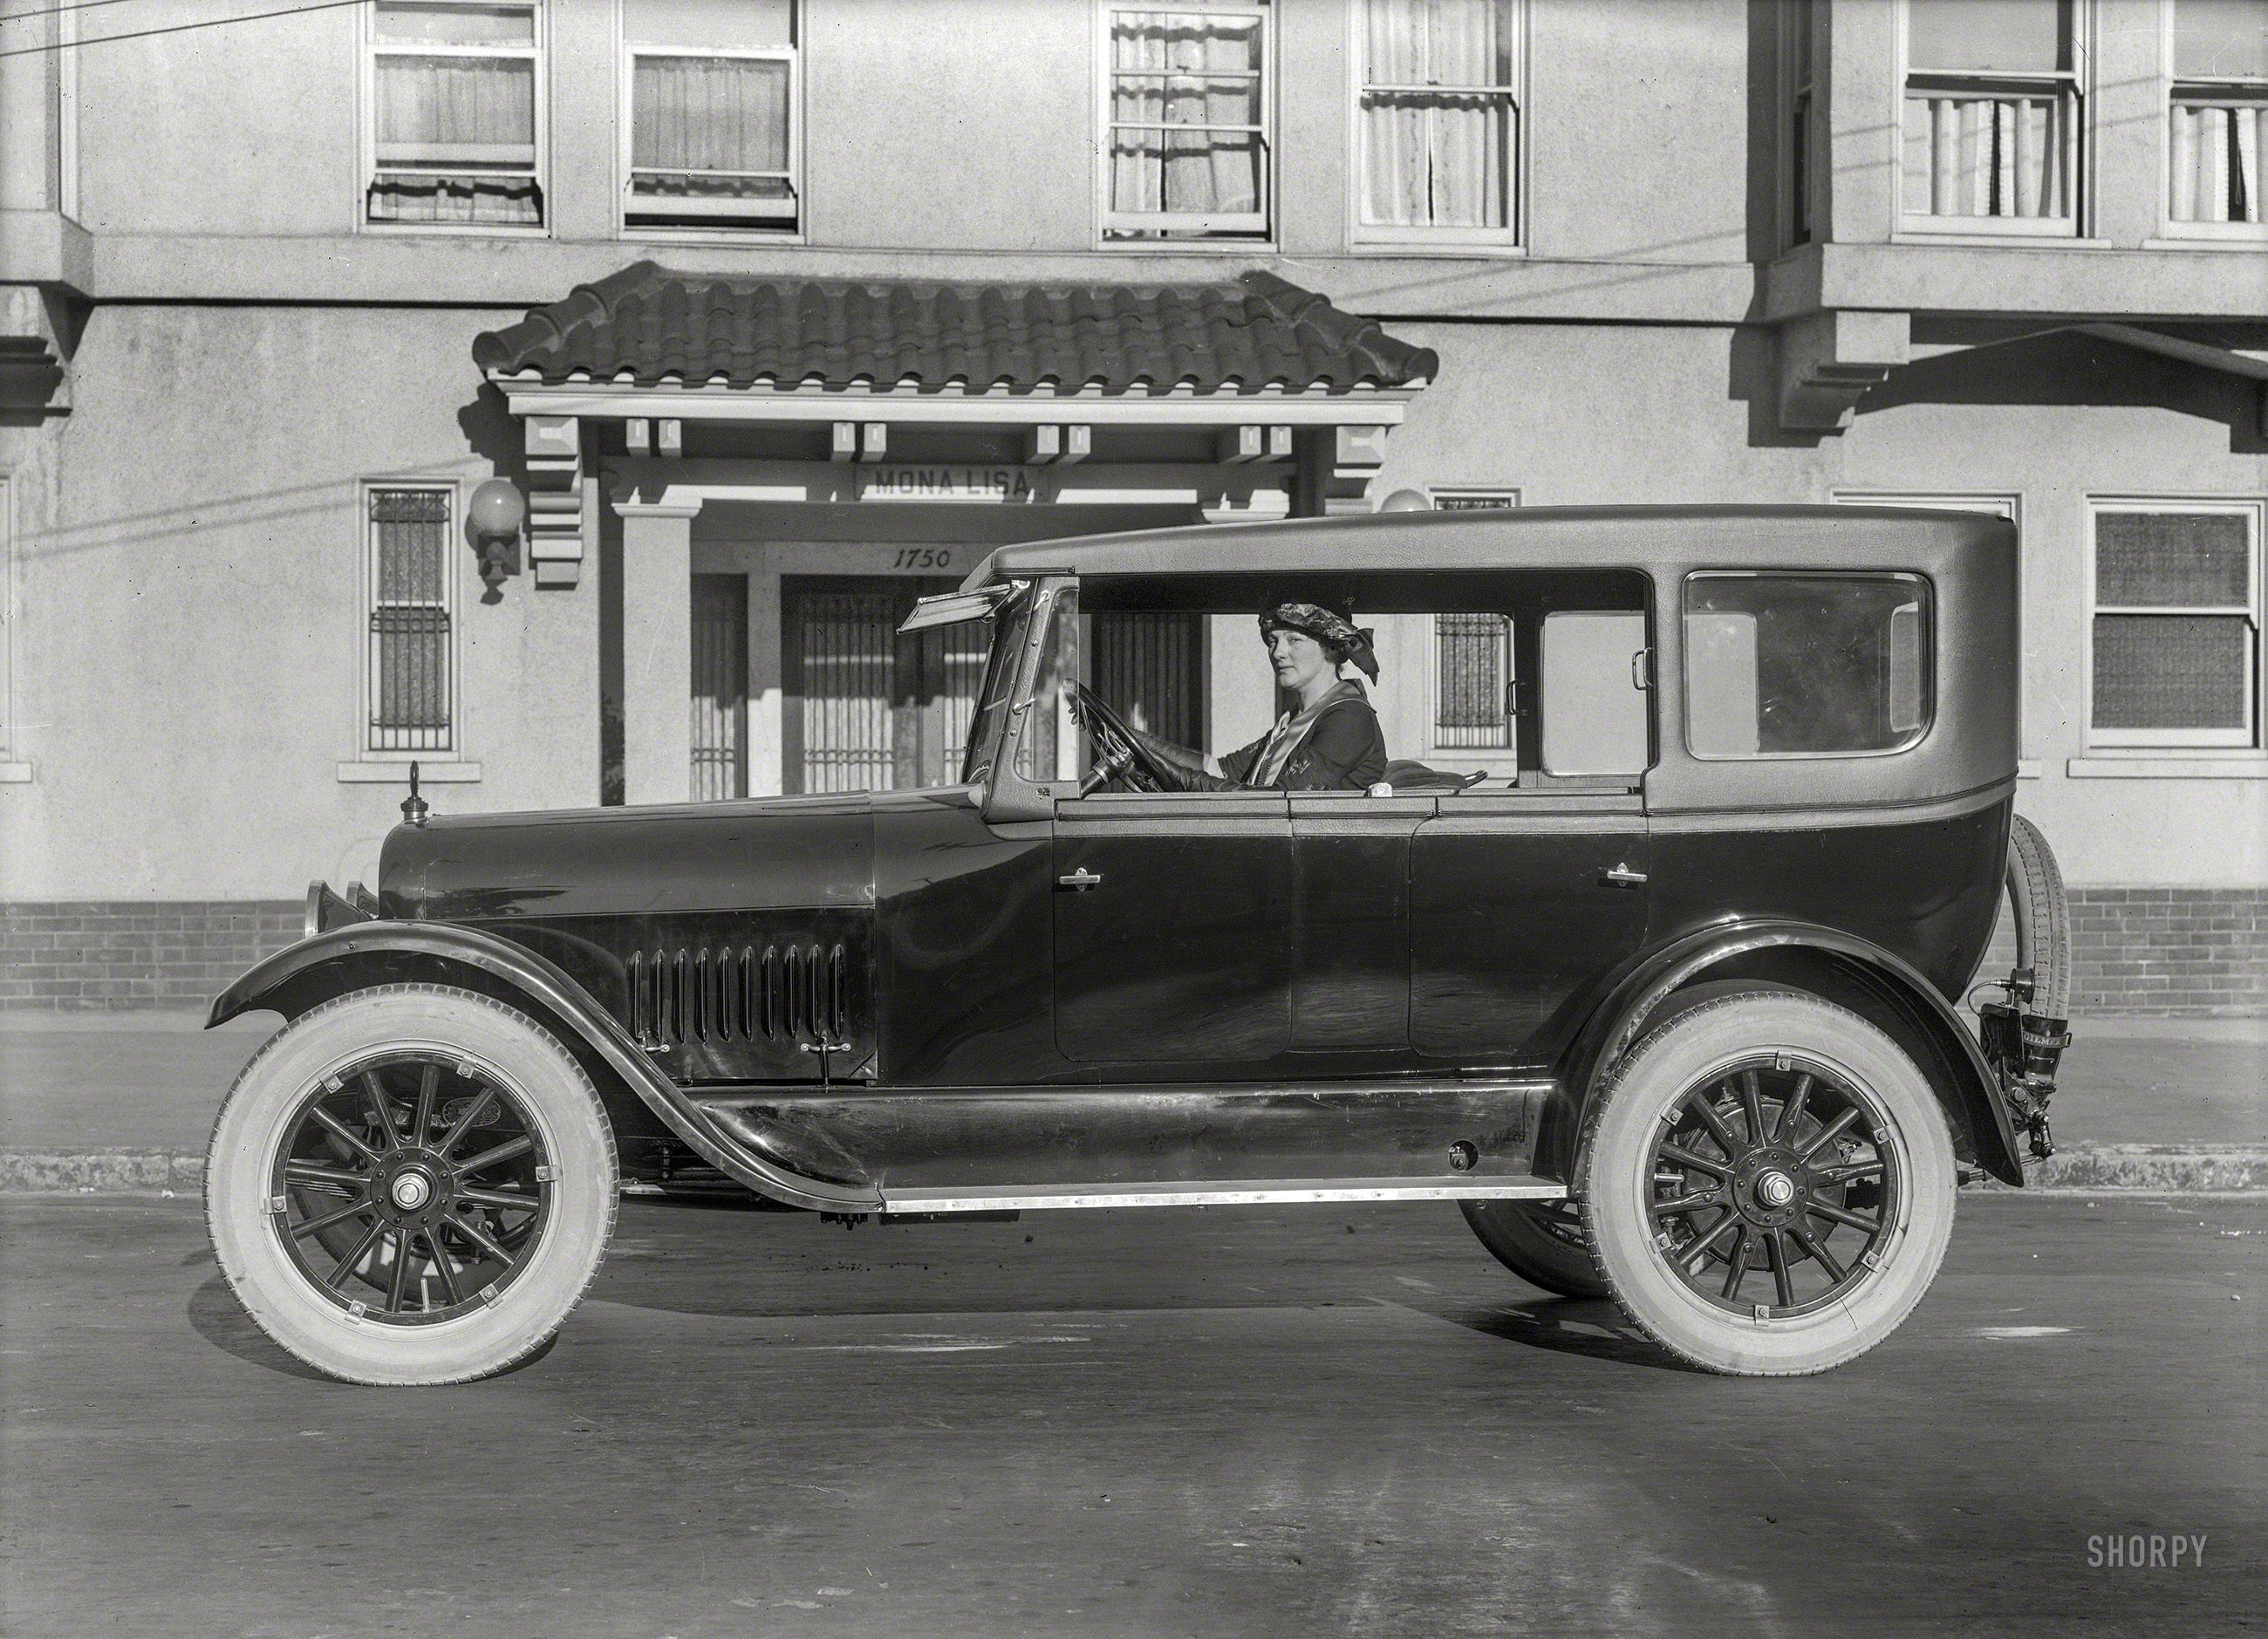 San Francisco circa 1920. "Studebaker Special Six touring car at Mona Lisa apartments." Fitted with yet another variation on the "California top." 5x7 inch glass negative by Christopher Helin. View full size.